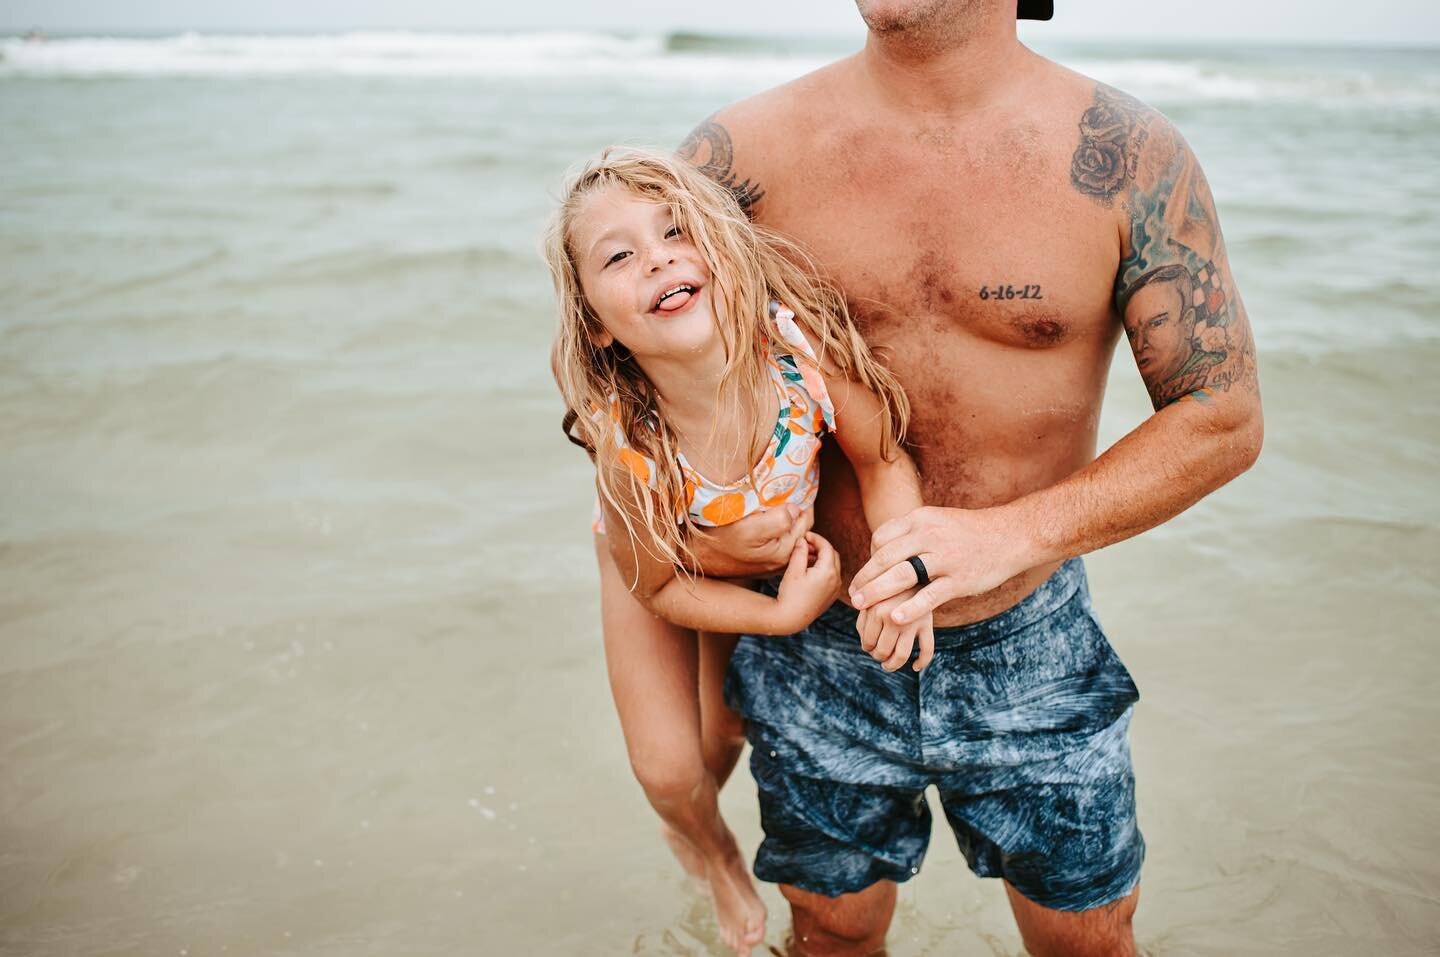 Dads at the beach are the real mvp. #maddoxanne